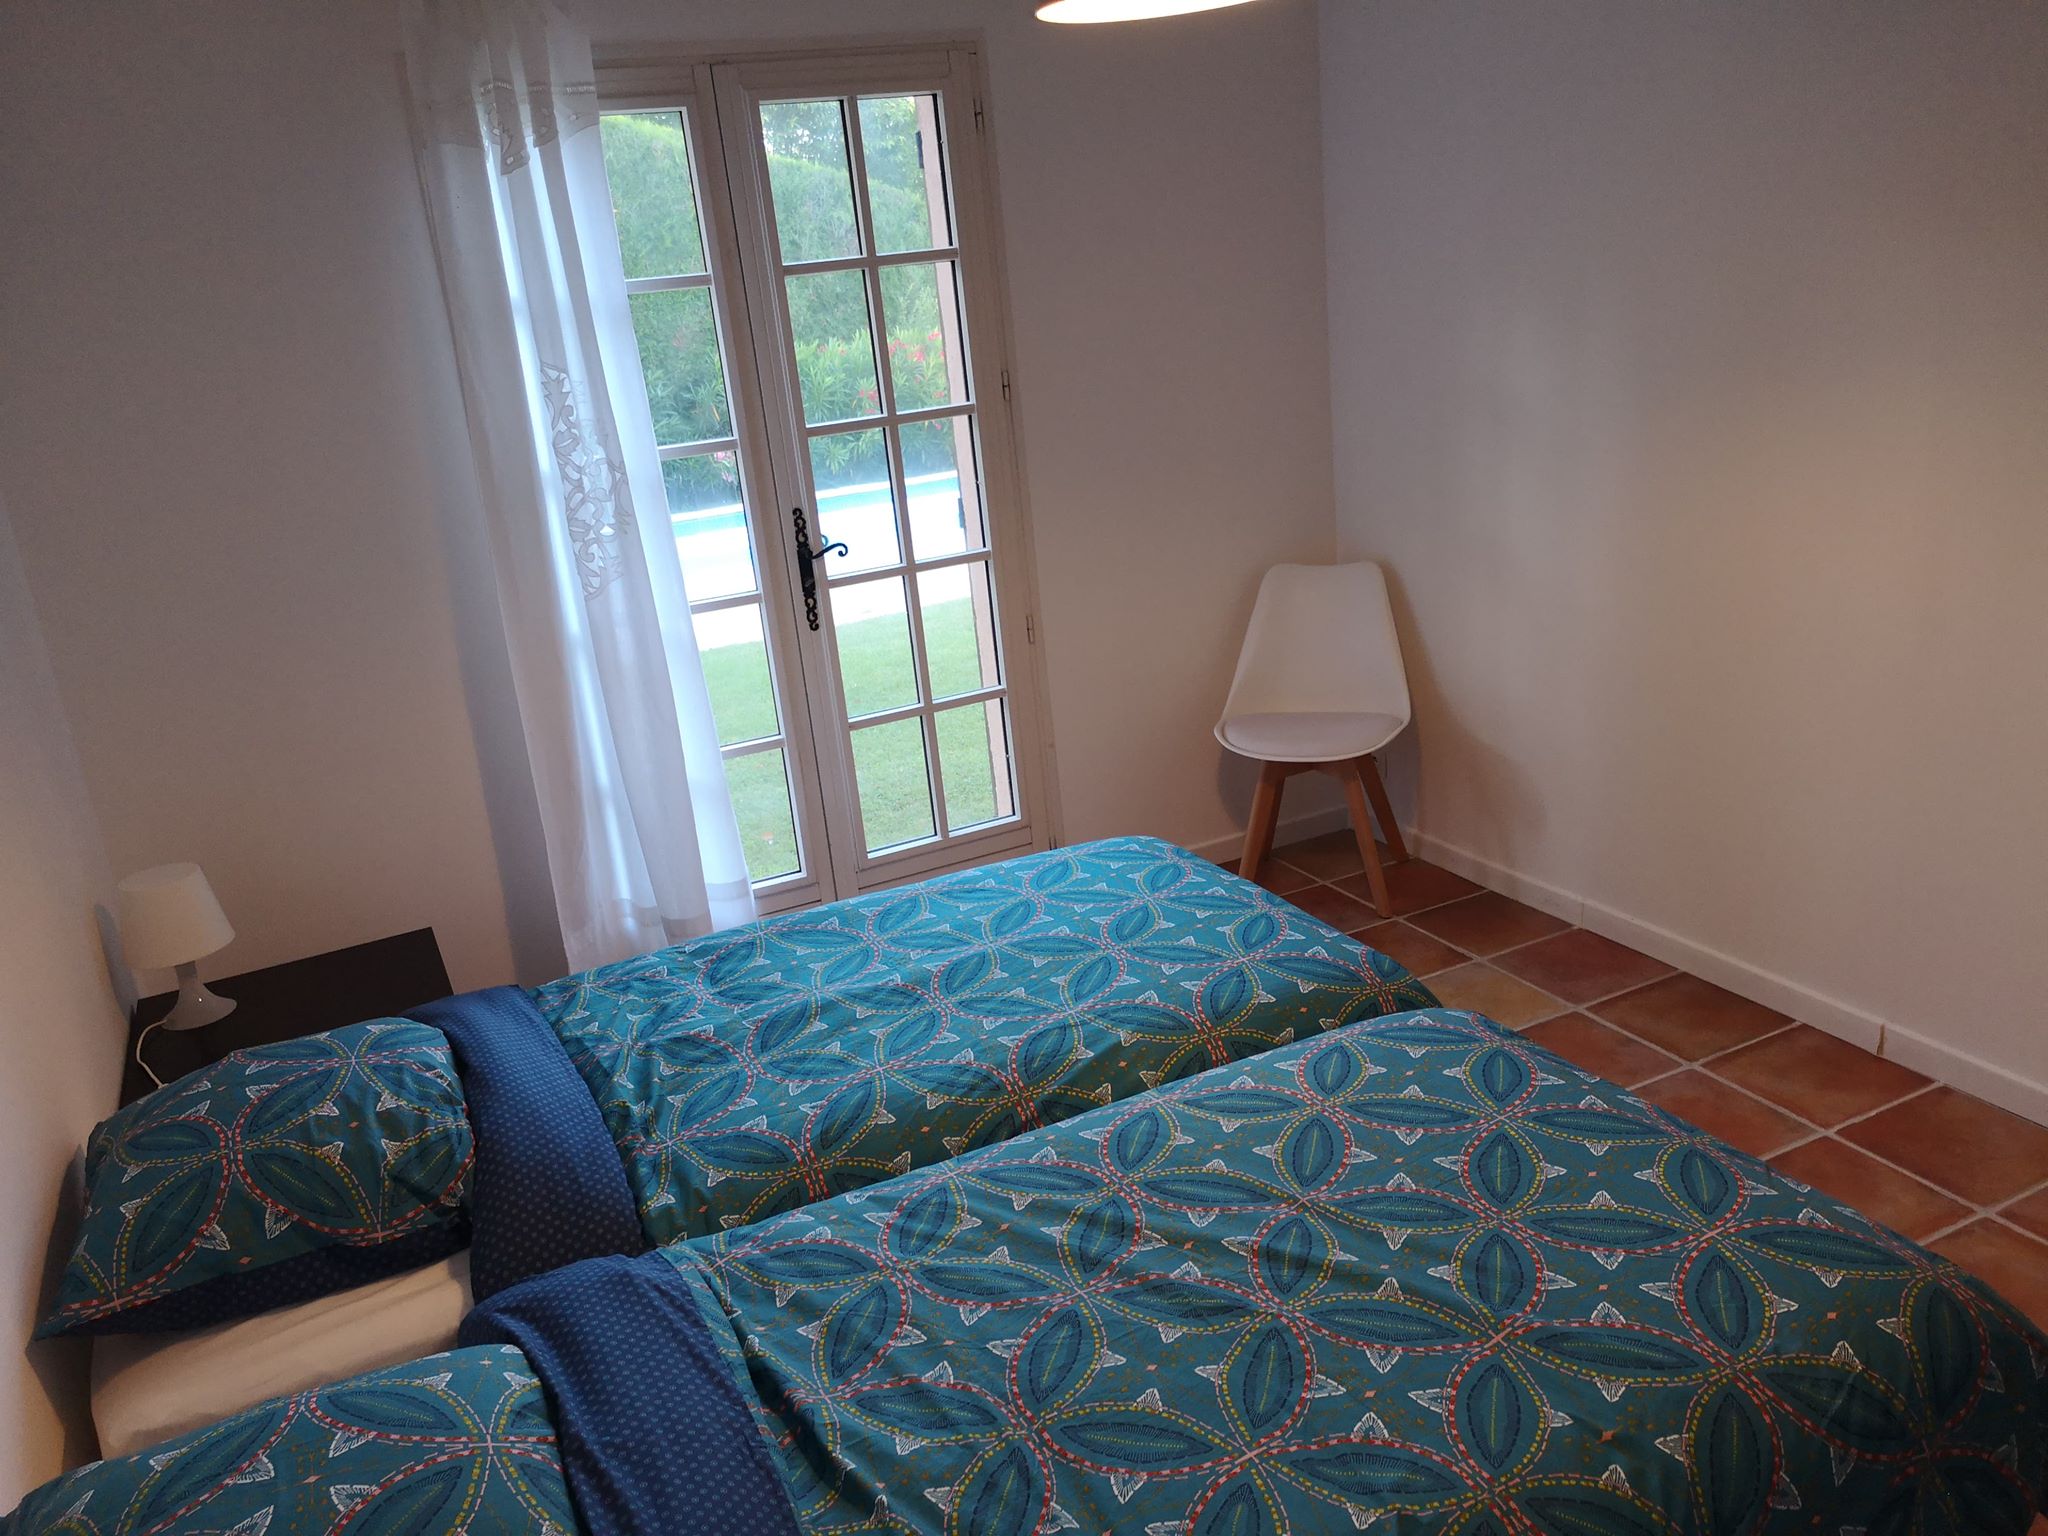 Second bedroom at the side of the swimmingpool